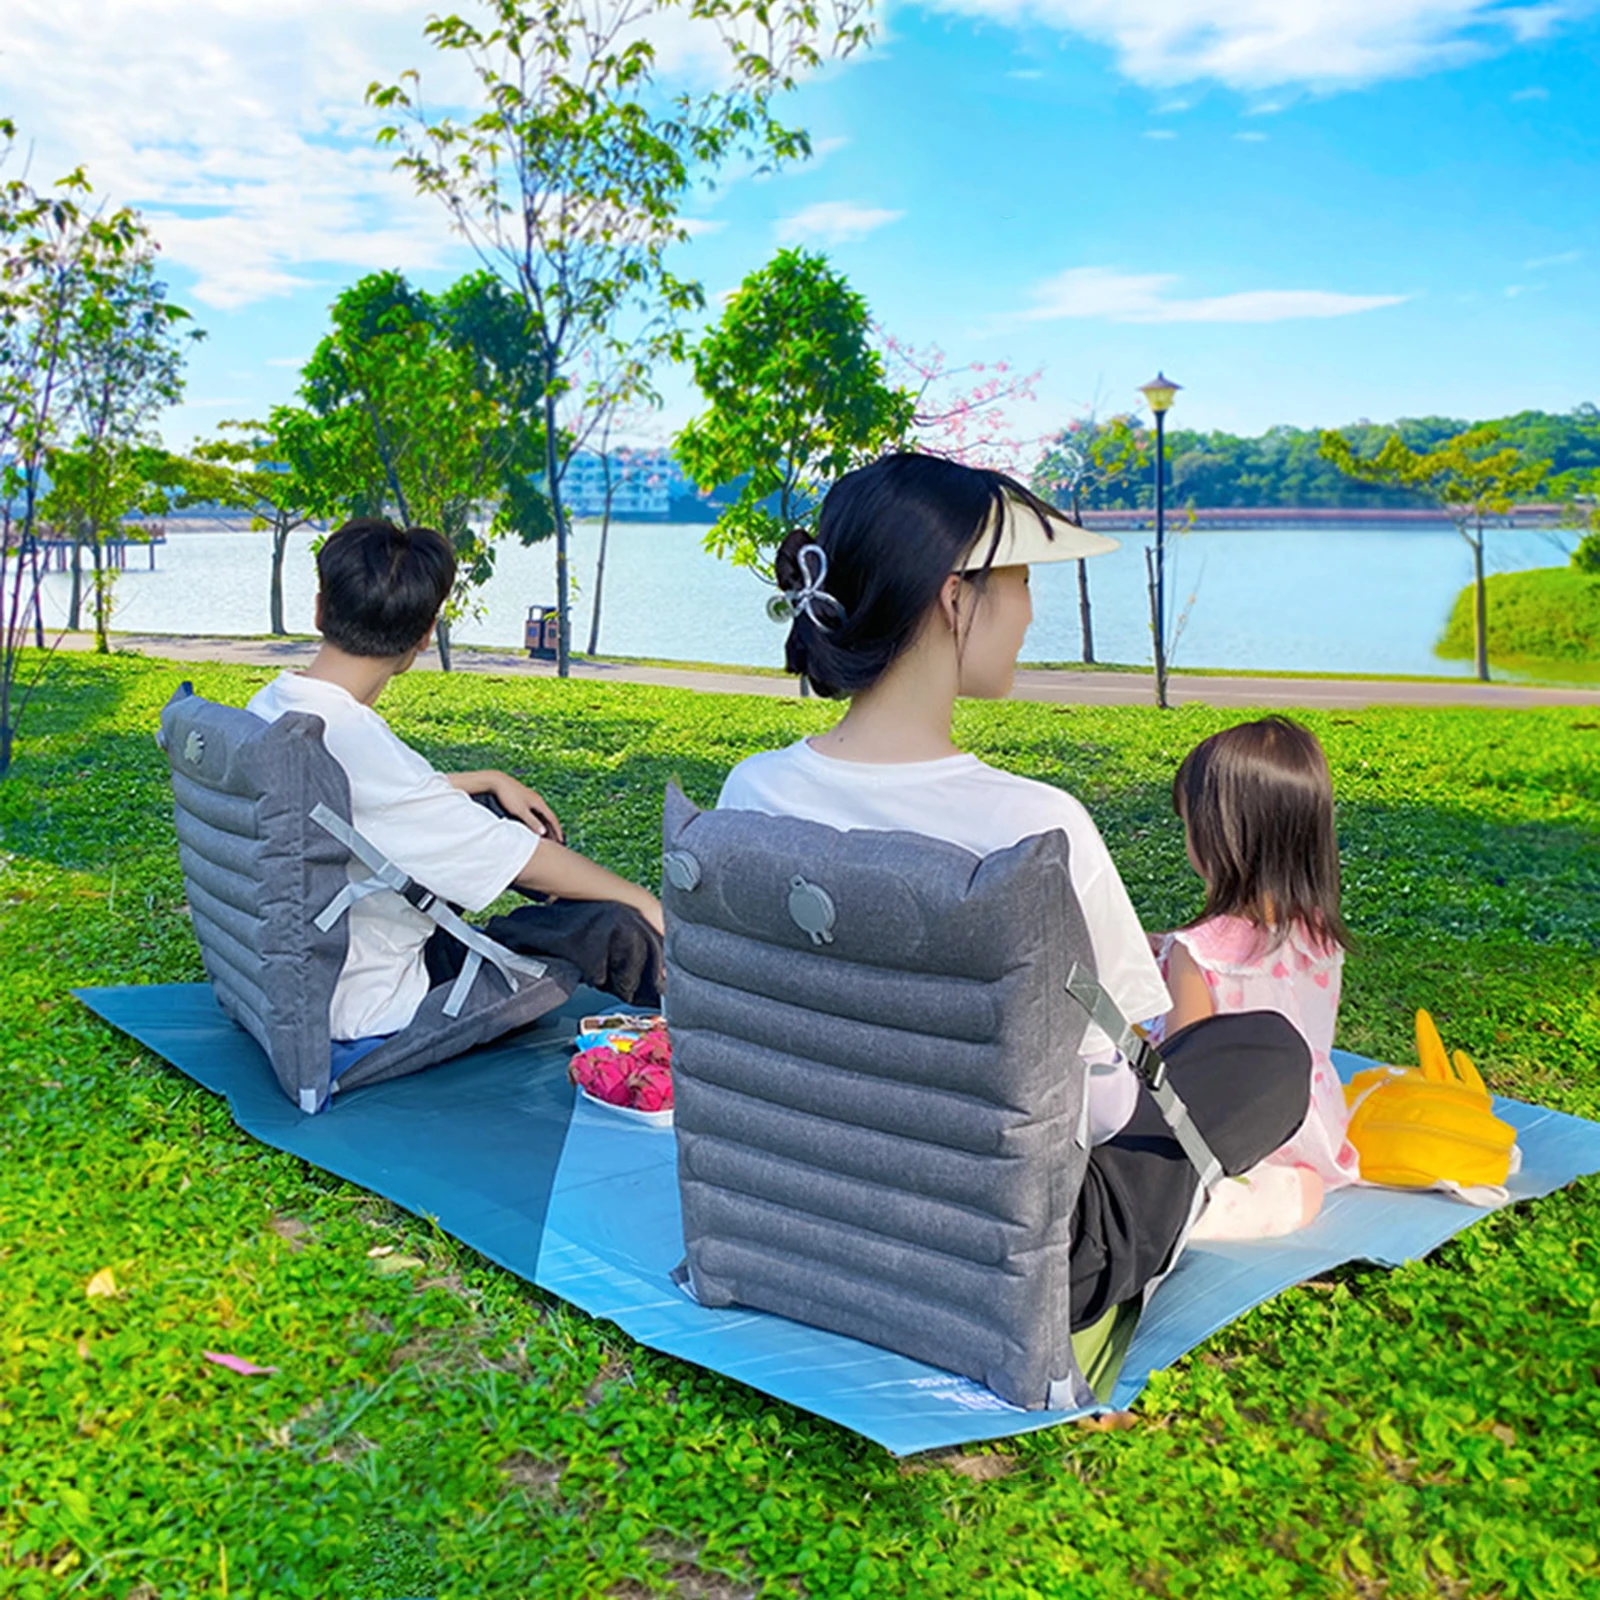 https://ae01.alicdn.com/kf/S5cae697688614b4d94d724758b1c4eddQ/Floor-Chair-with-Back-Support-Inflatable-Sleeping-Pad-with-Adjustable-Straps-Folding-Stadium-Seat-for-Car.jpg